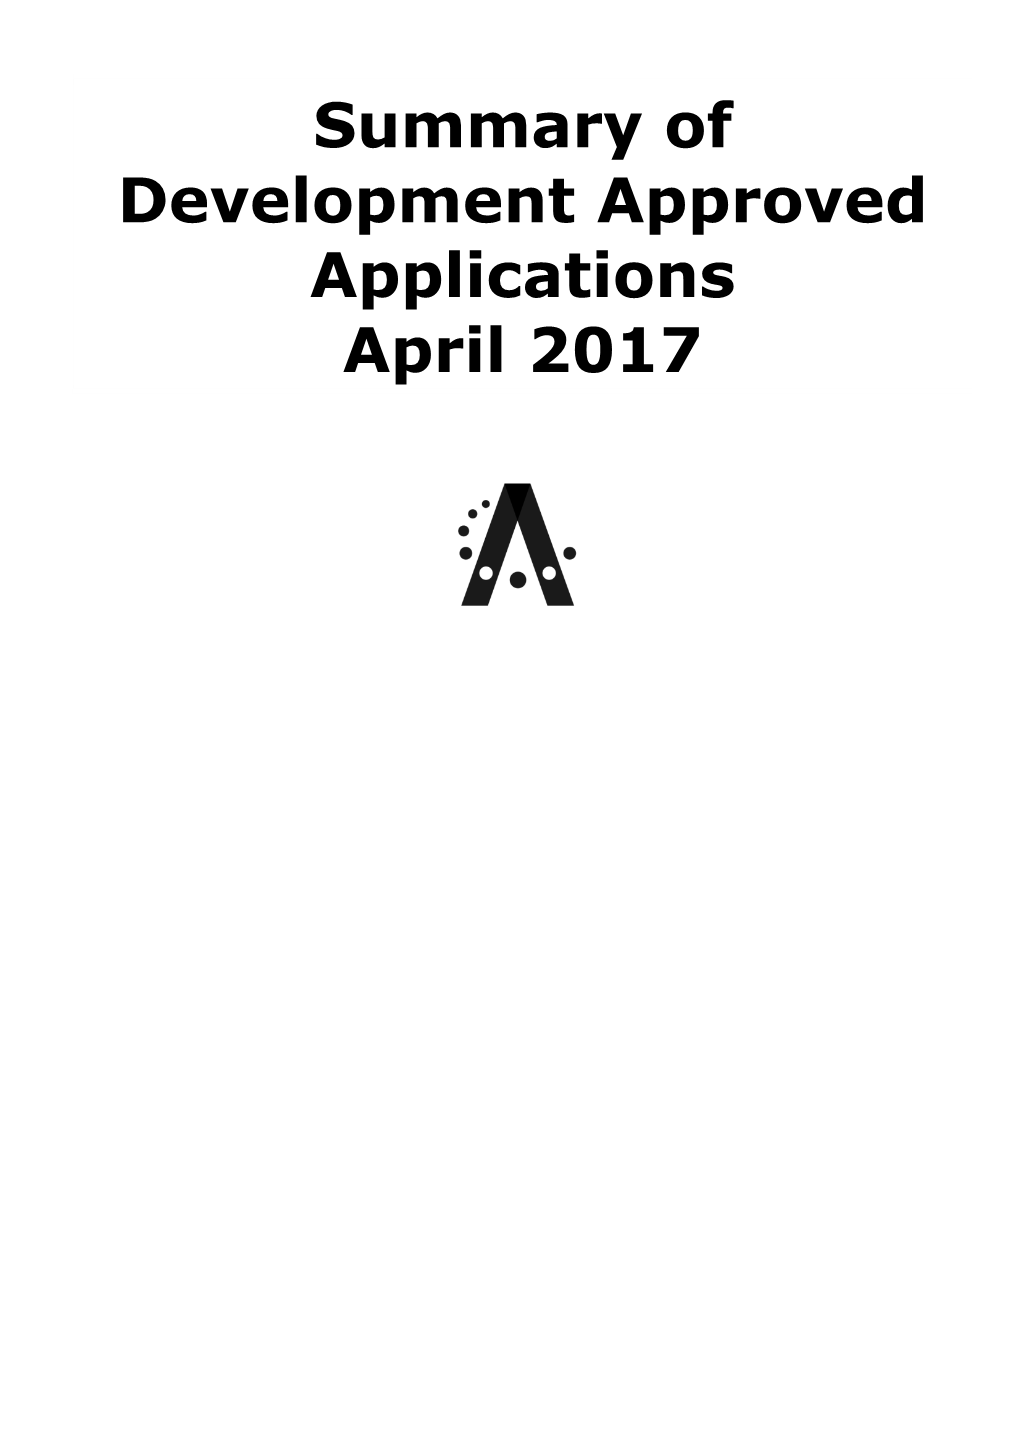 Summary of Development Approved Applications April 2017